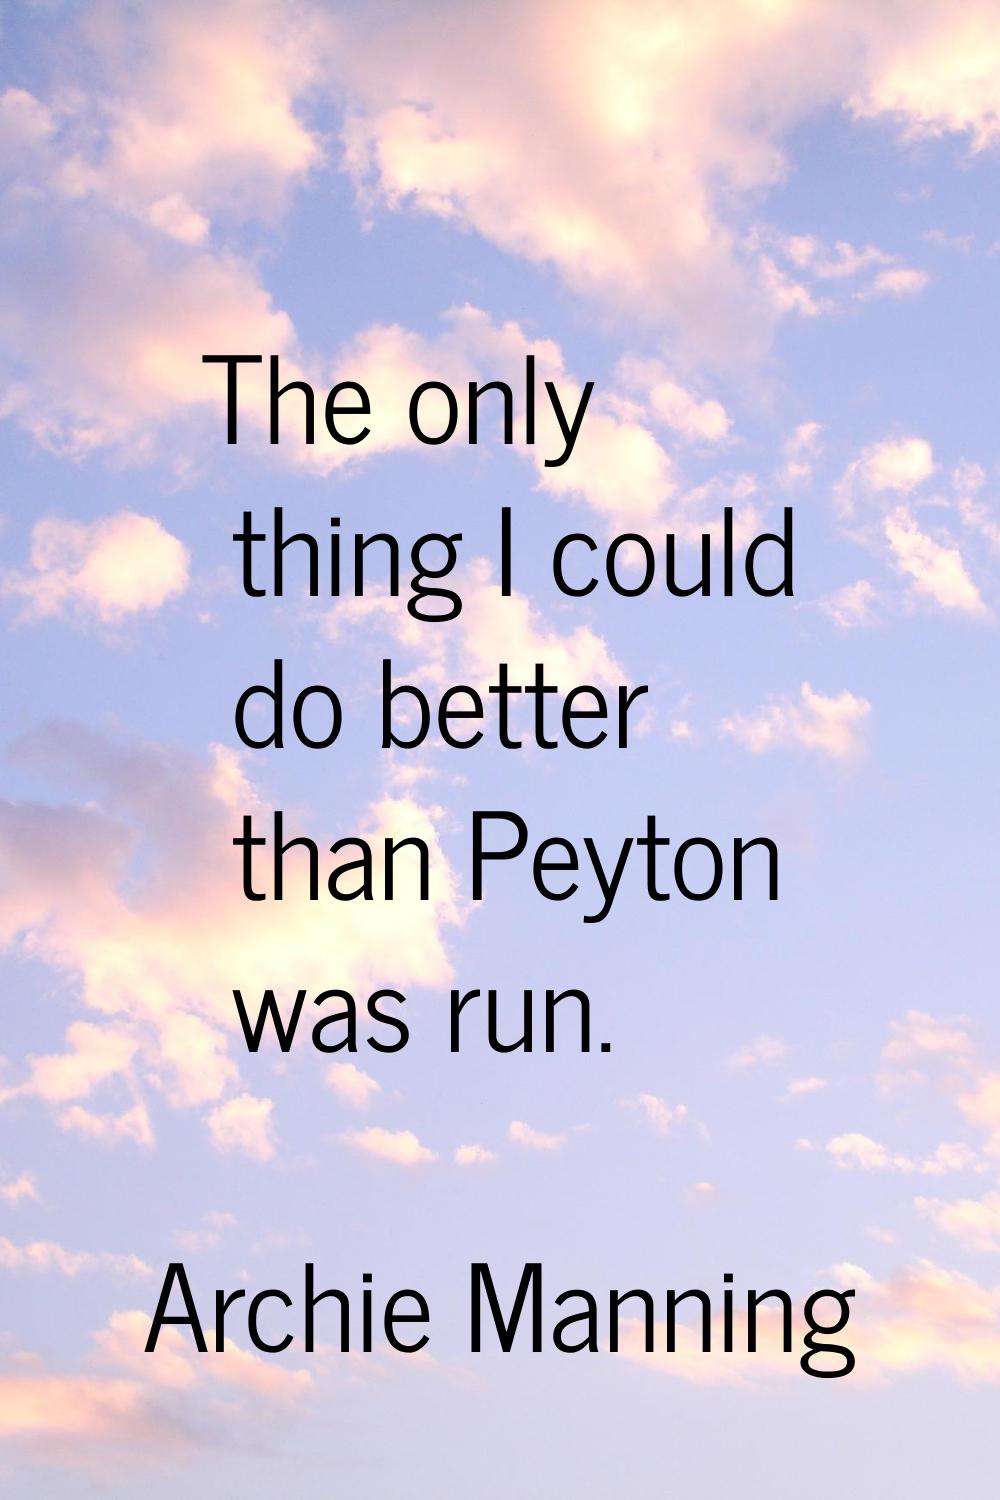 The only thing I could do better than Peyton was run.